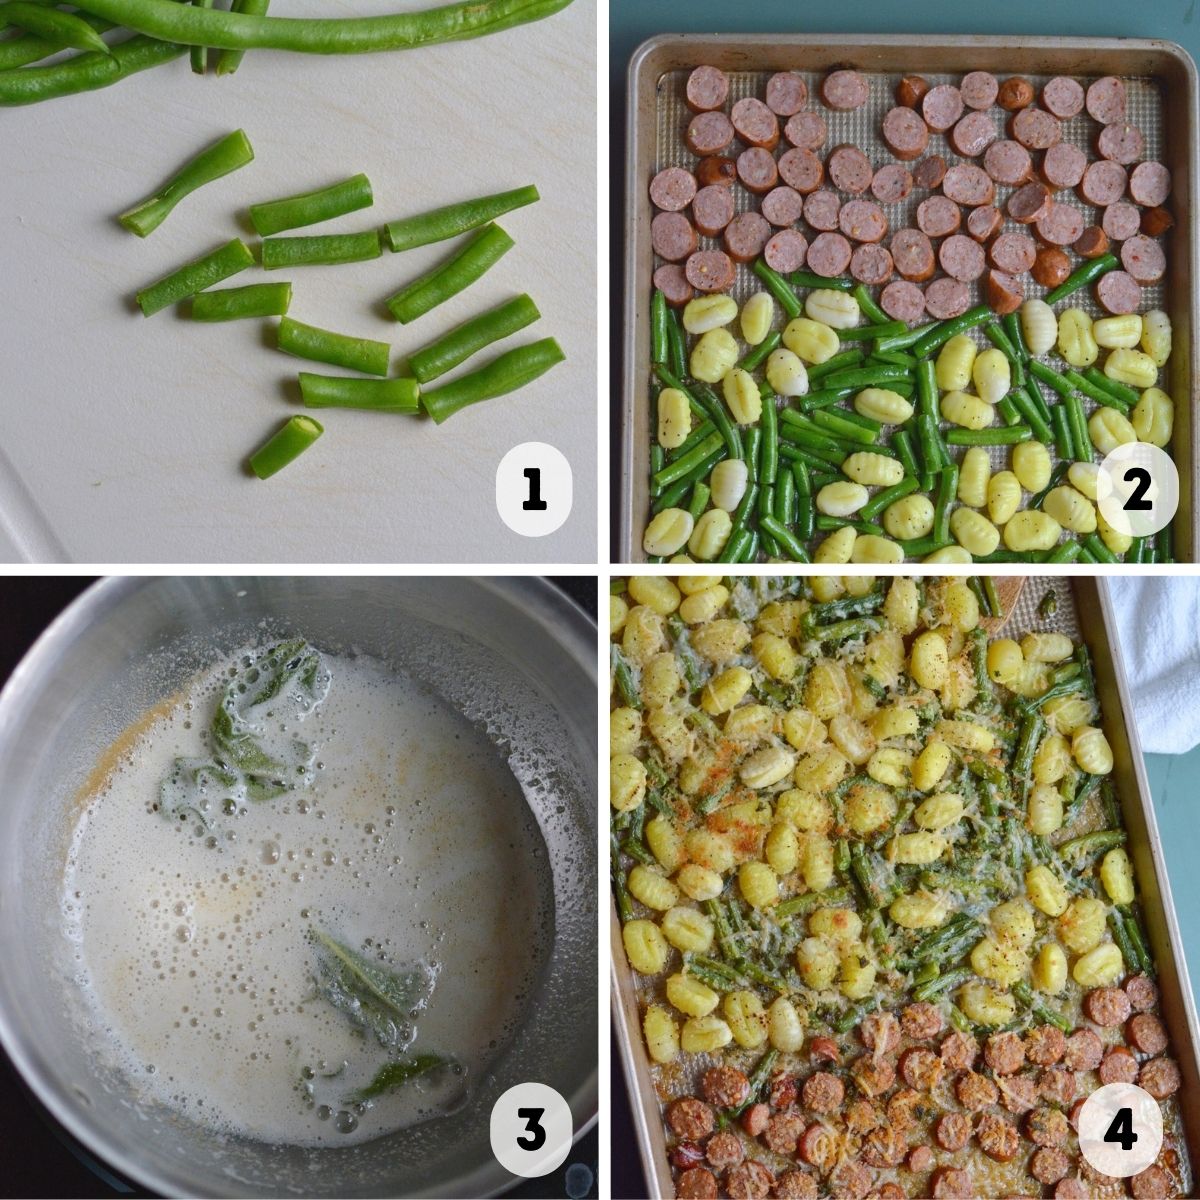 Step by step gallery with step 1 cutting green beans, step 2 baking everything on a tray, step 3 making the brown butter, and step 4 combine the two and broil.